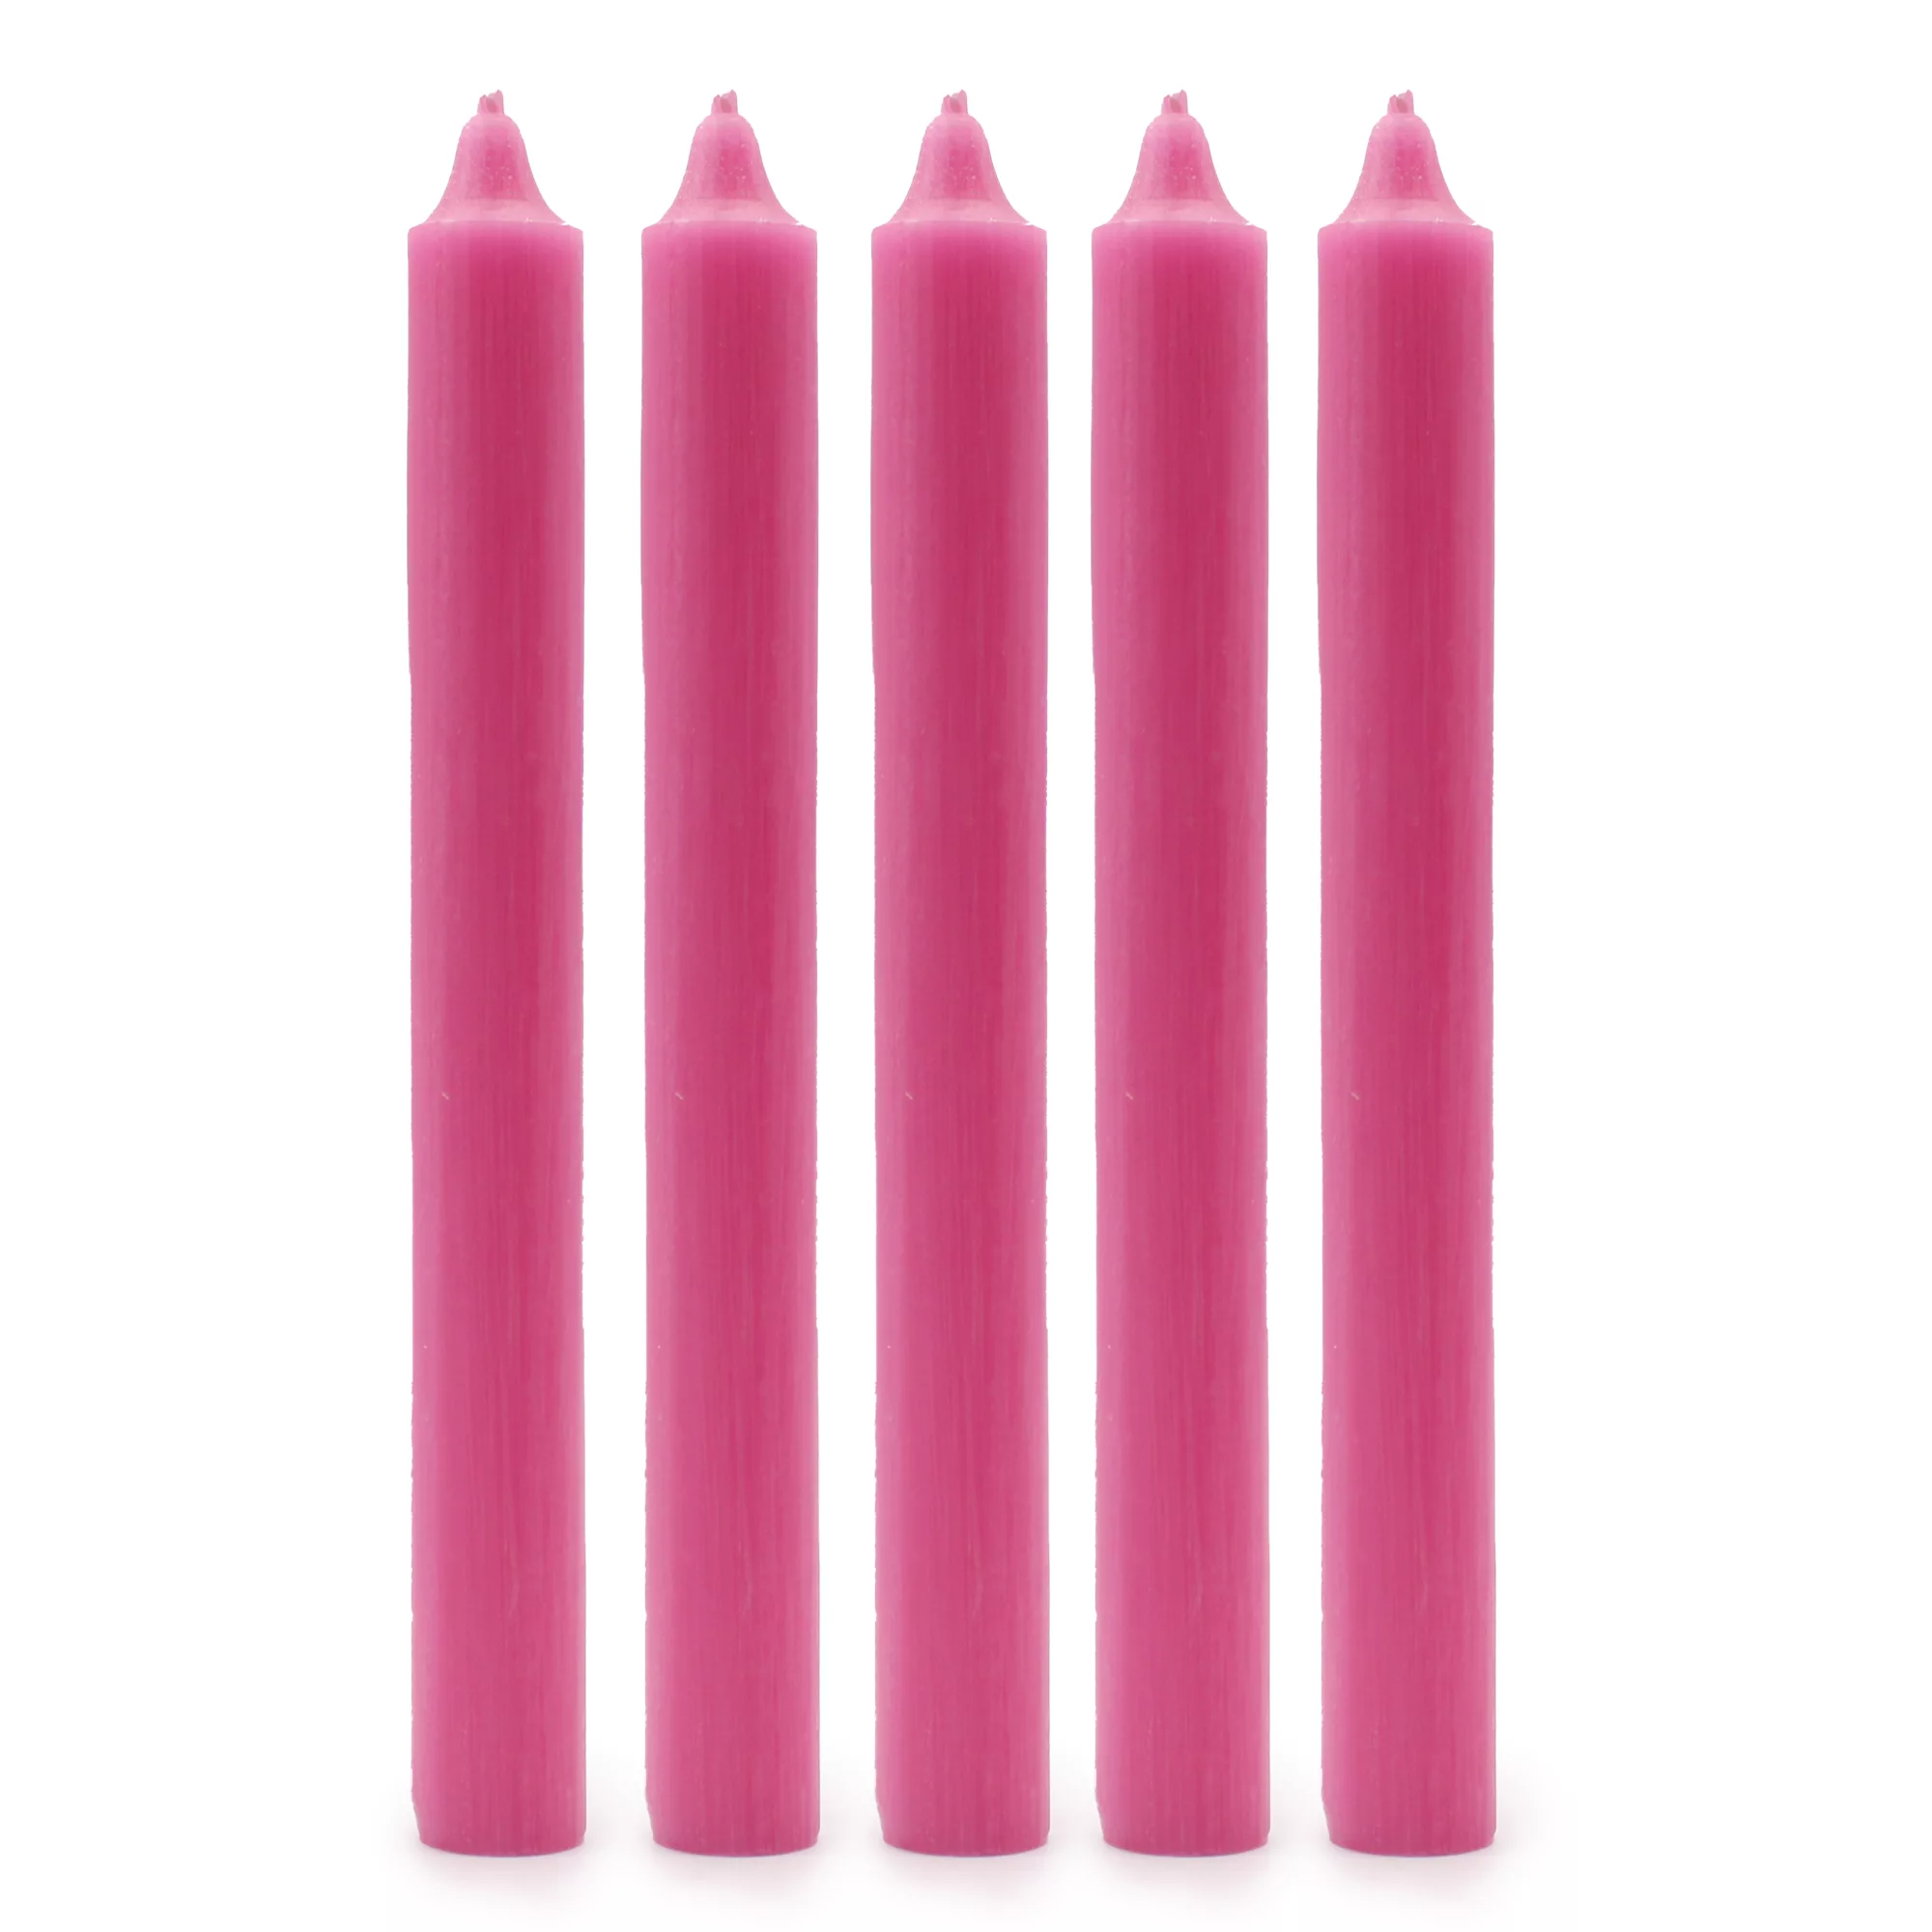 Solid Colour Dinner Candles – Rustic Deep Pink – Pack of 5